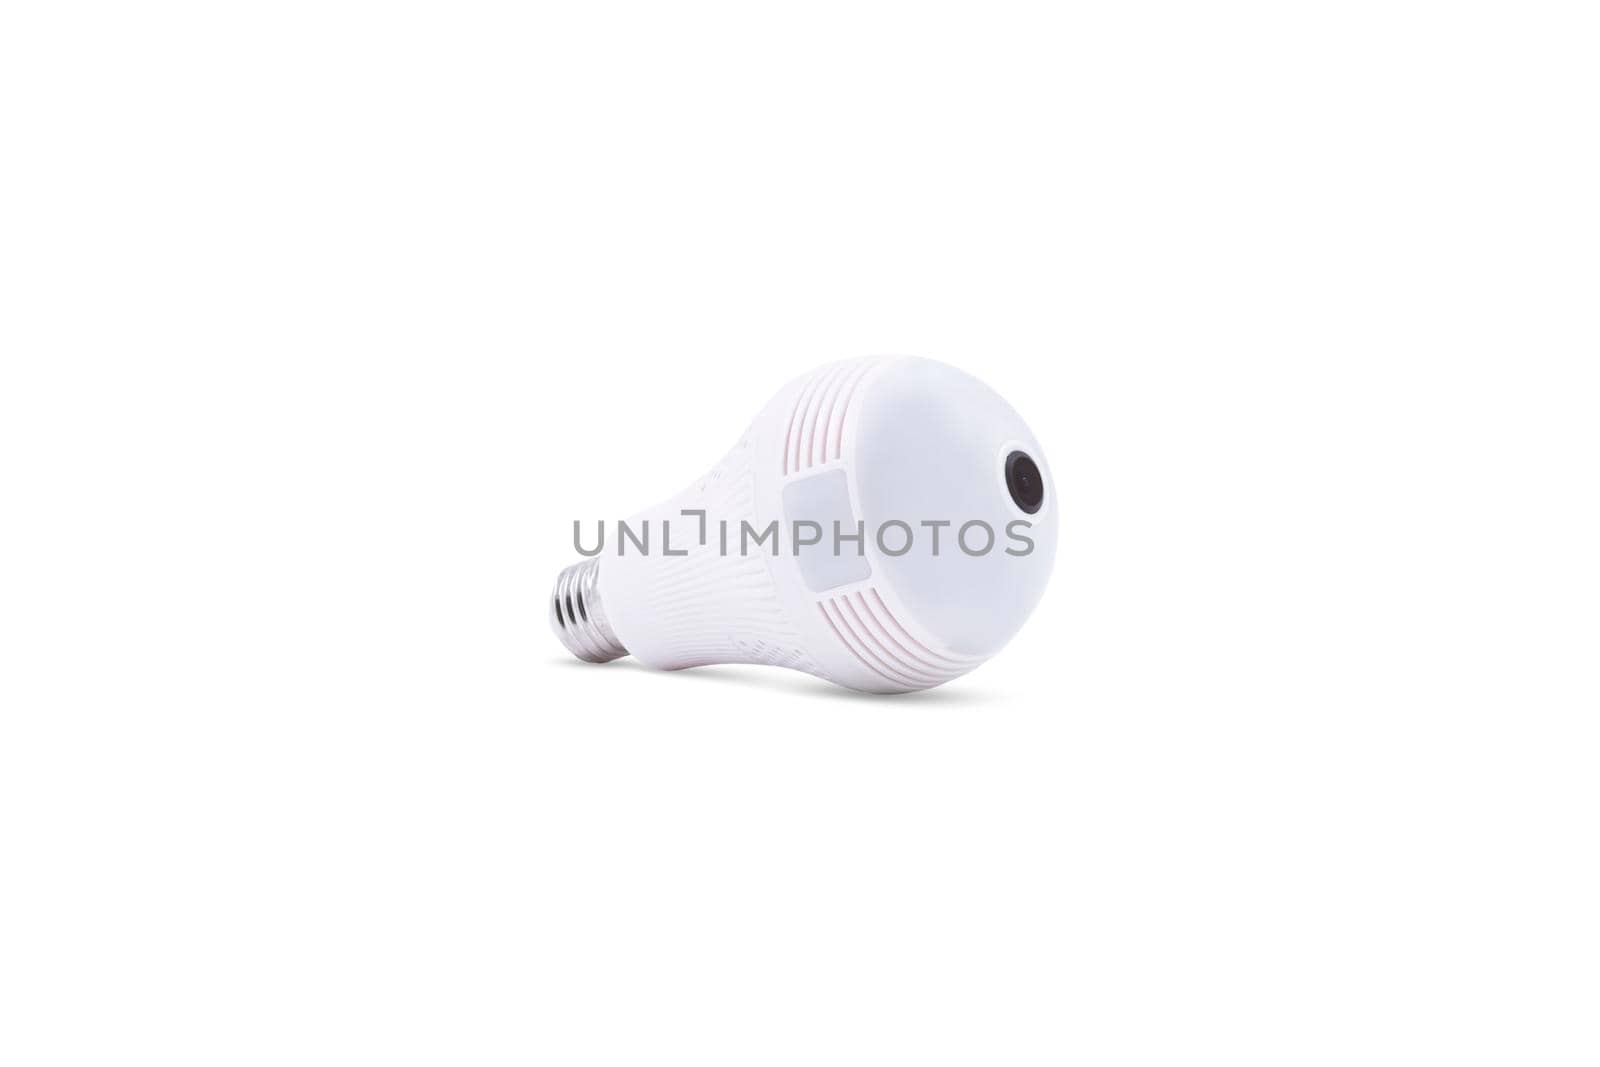 LED light with built-in camera can view images online with the app on white background. by wattanaphob